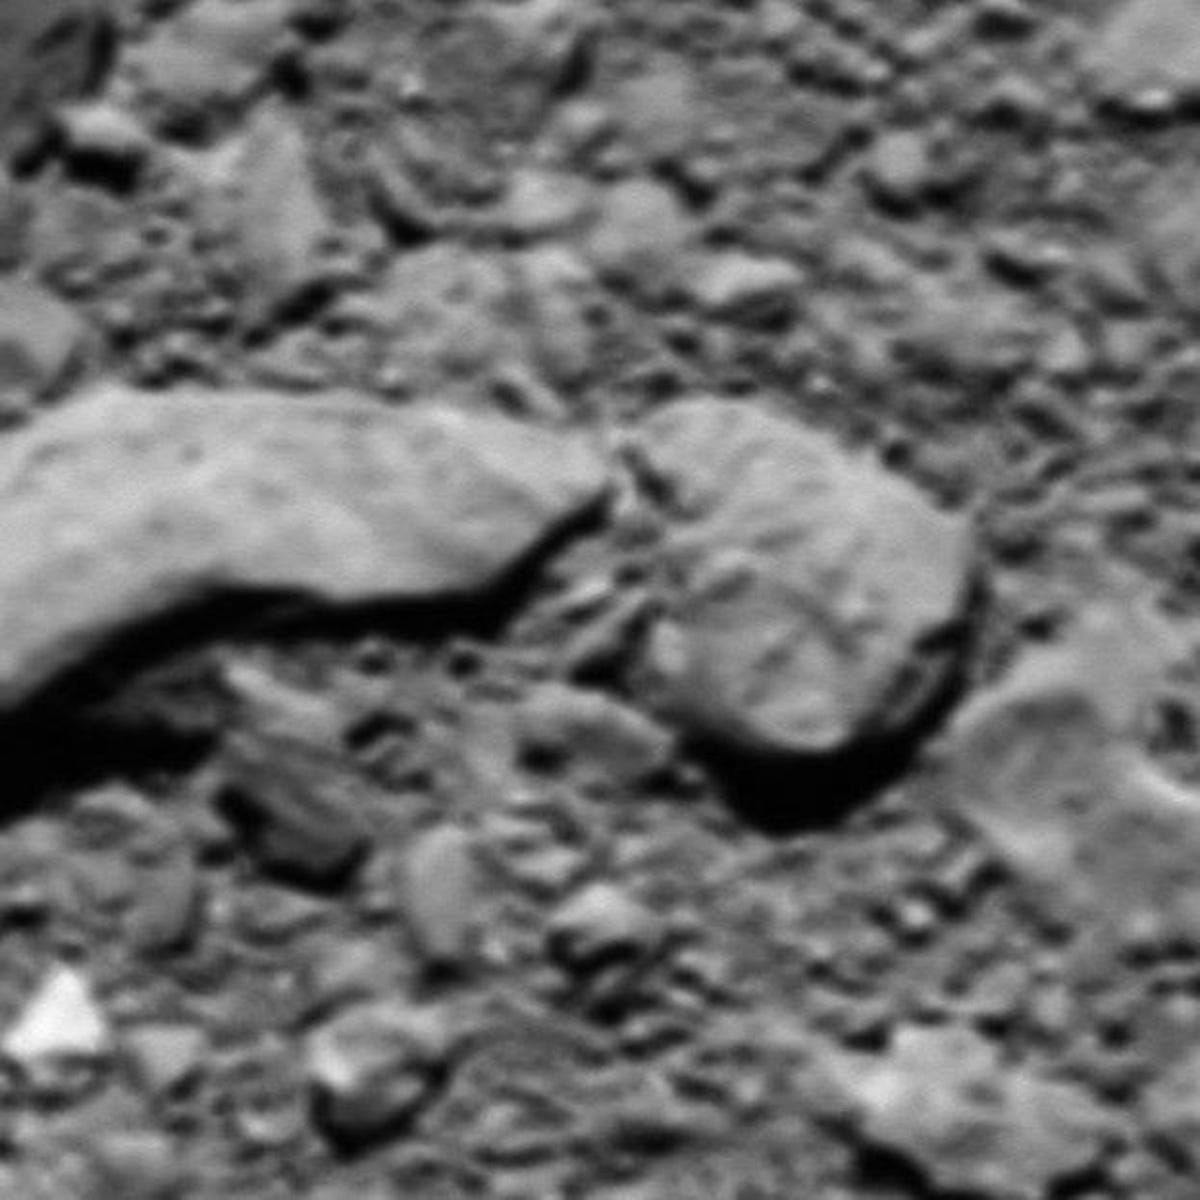 Blurry view of rocks and rubble on the surface of a comet.